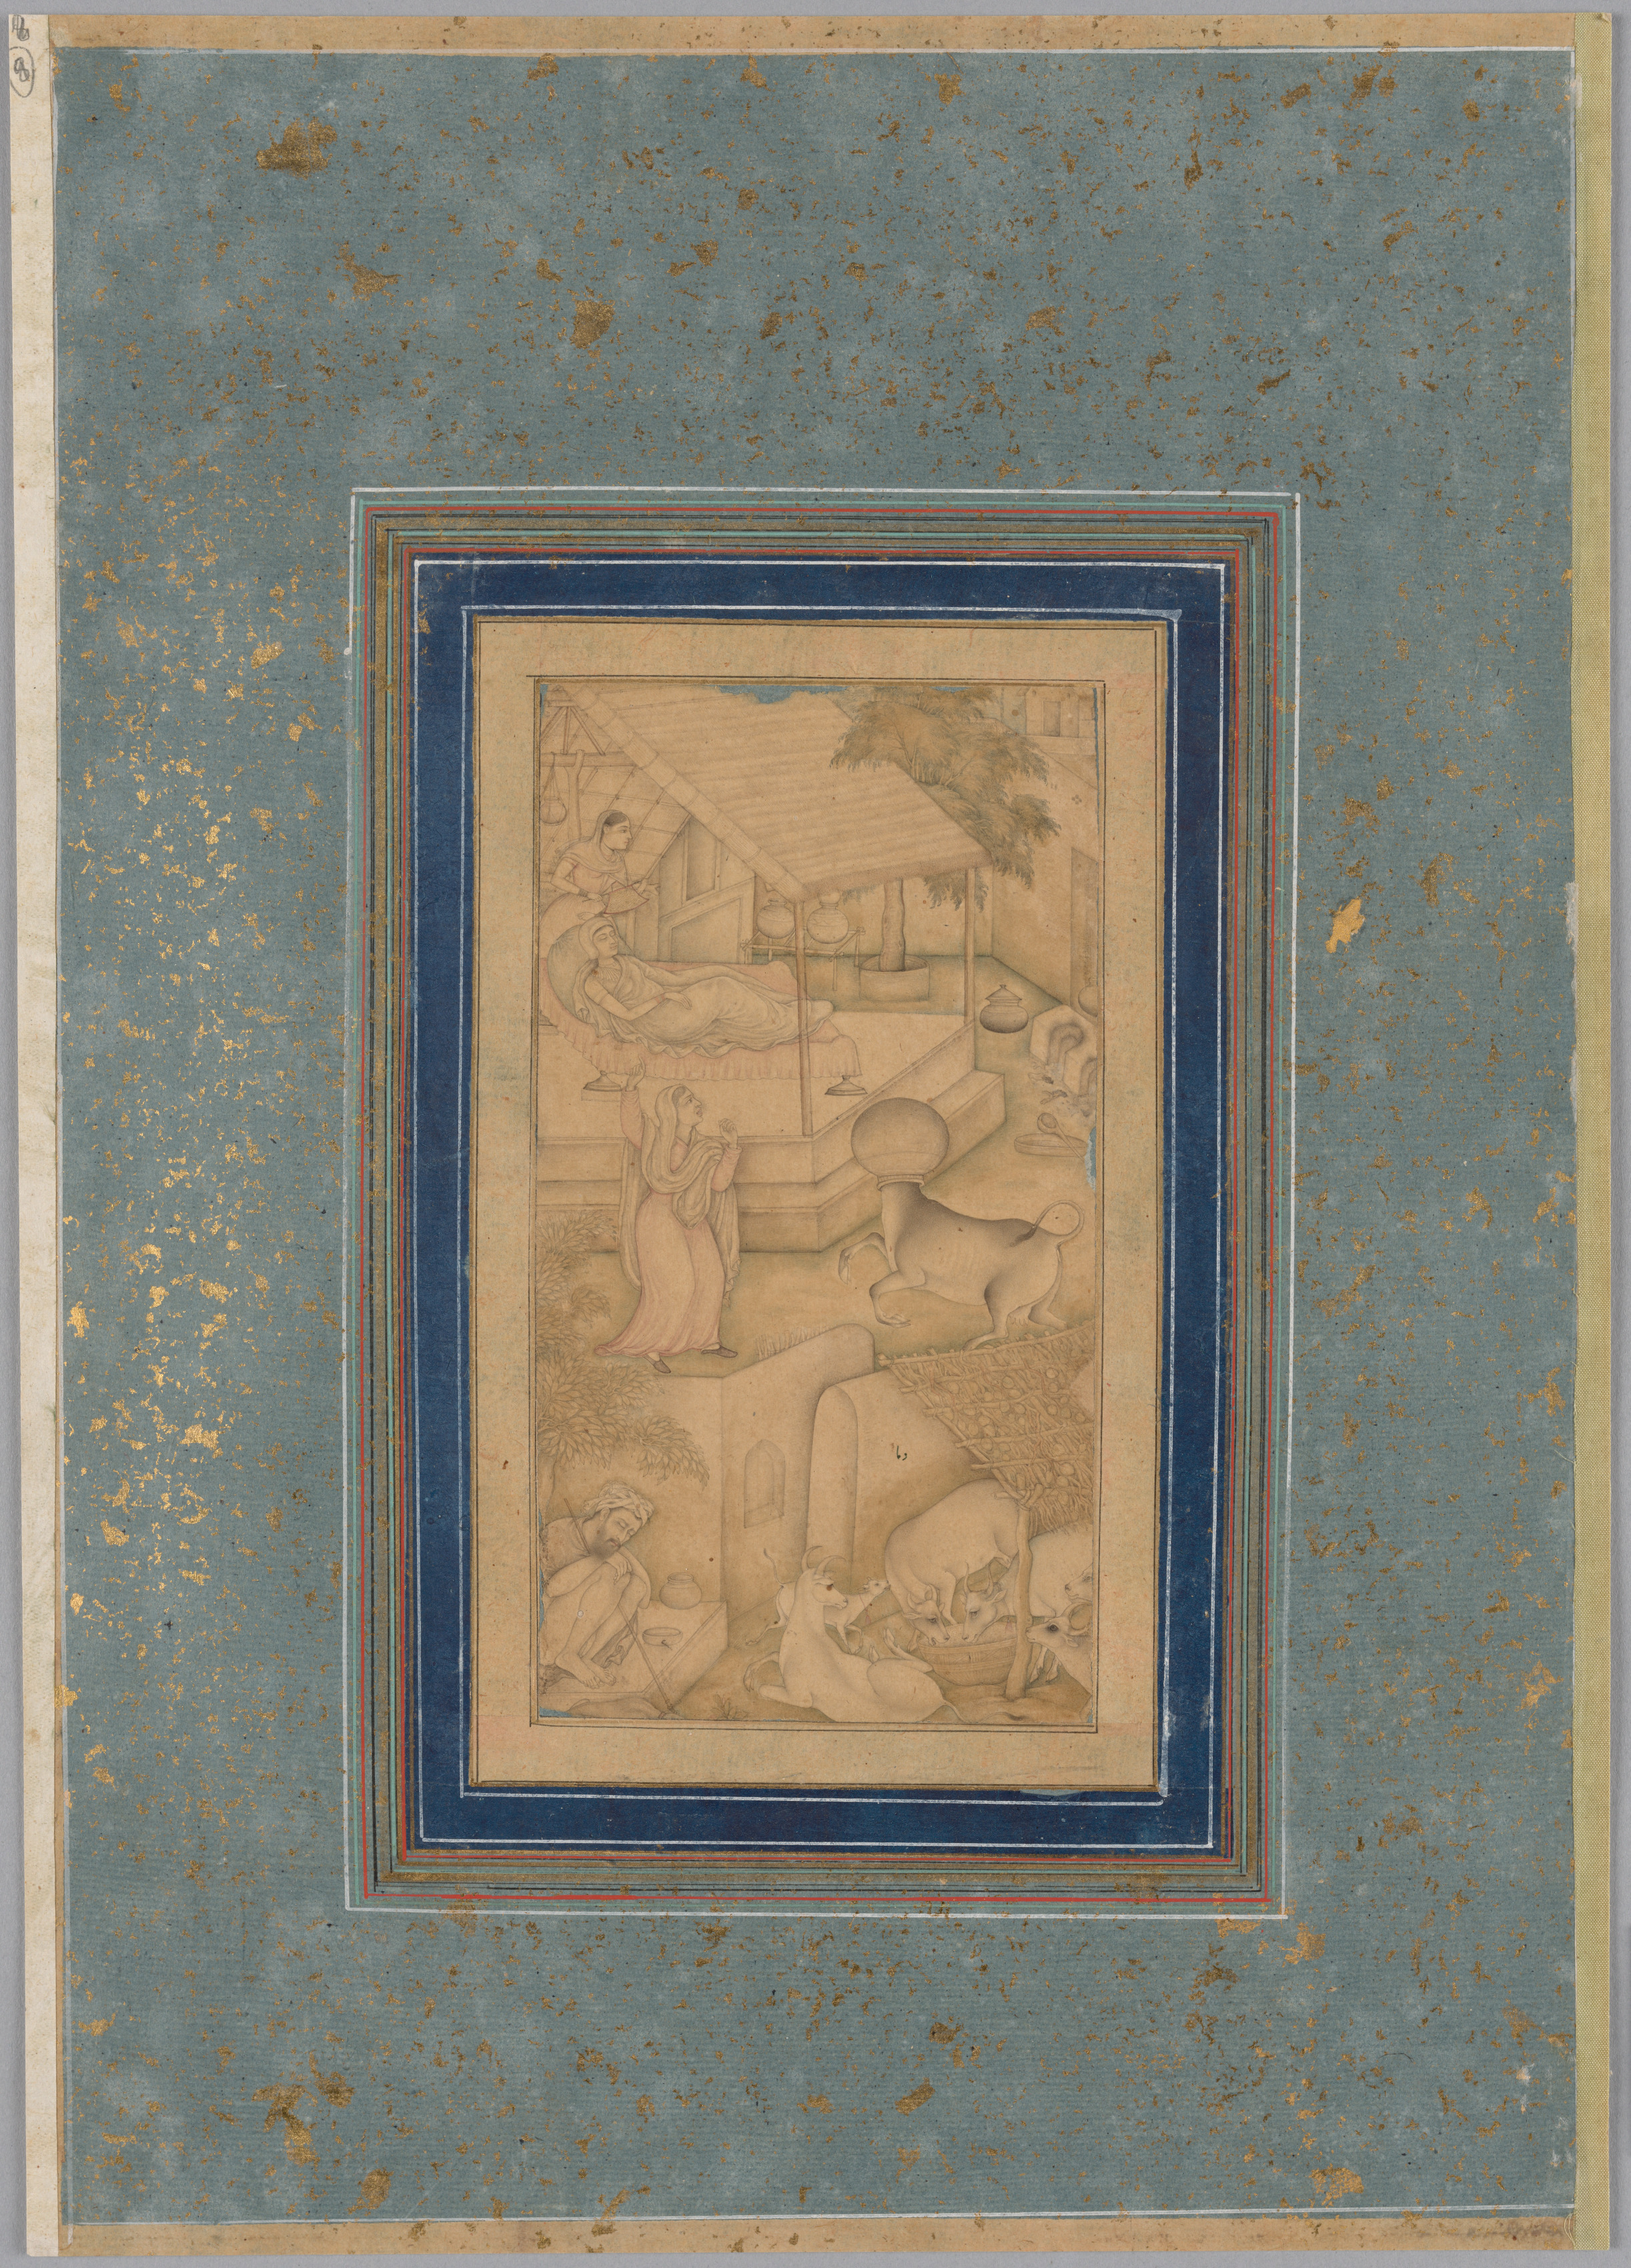 A woman mistakes a cow for the Angel of Death, from a Lights of Canopus (Anwar-i Suhaili) of Kashifi (Iranian, d. 1504)